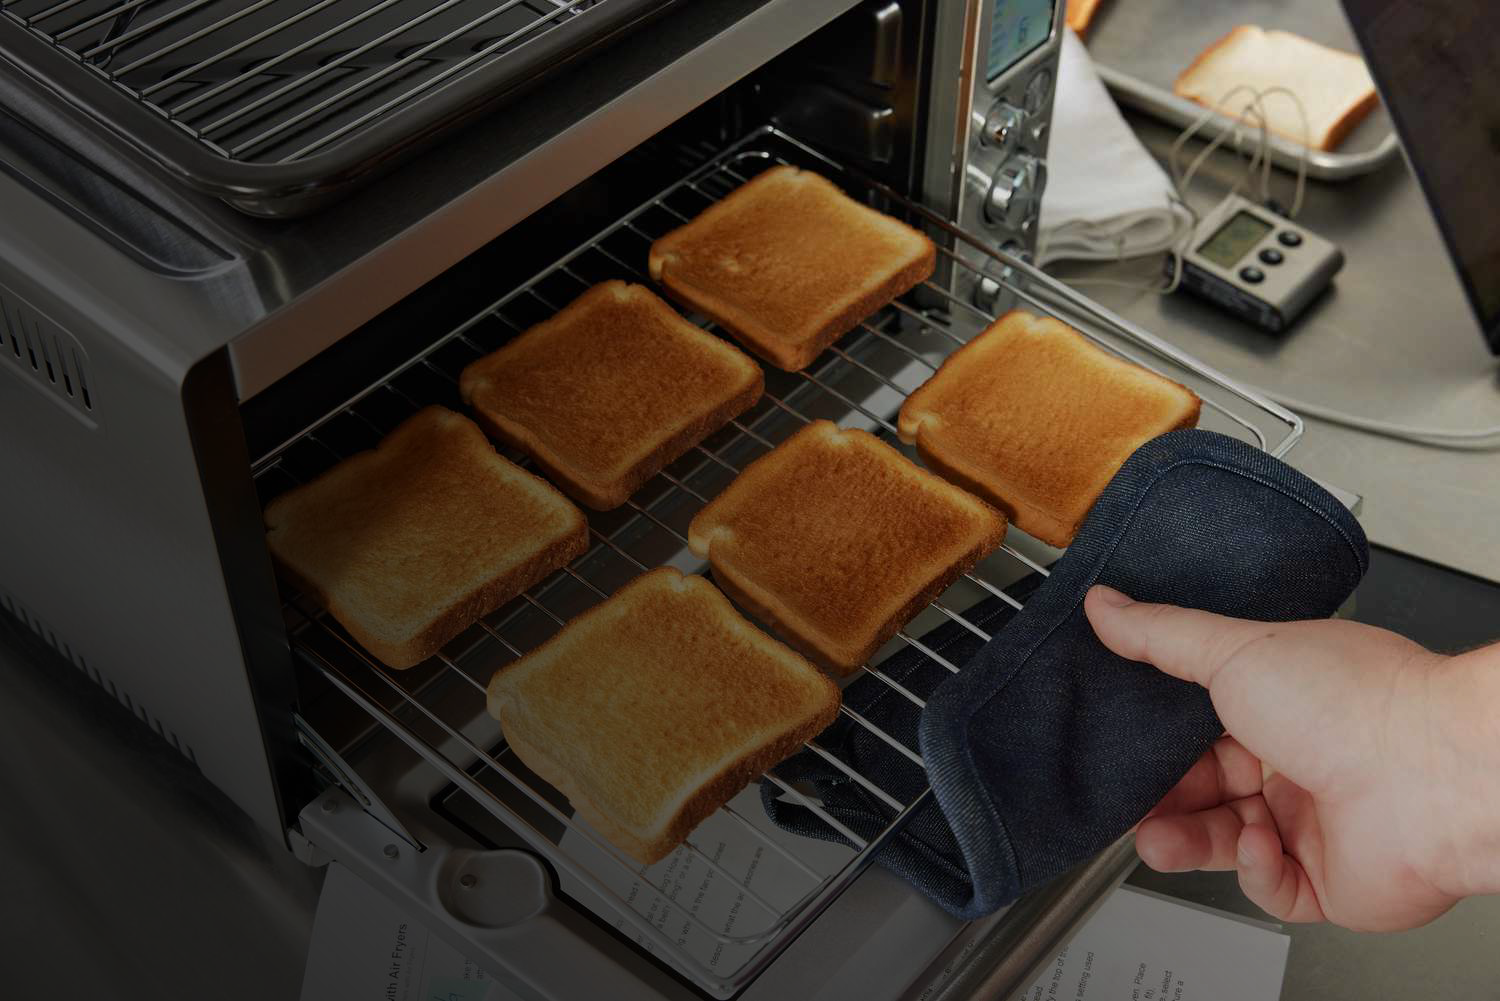 How to Toast Bread in an Oven